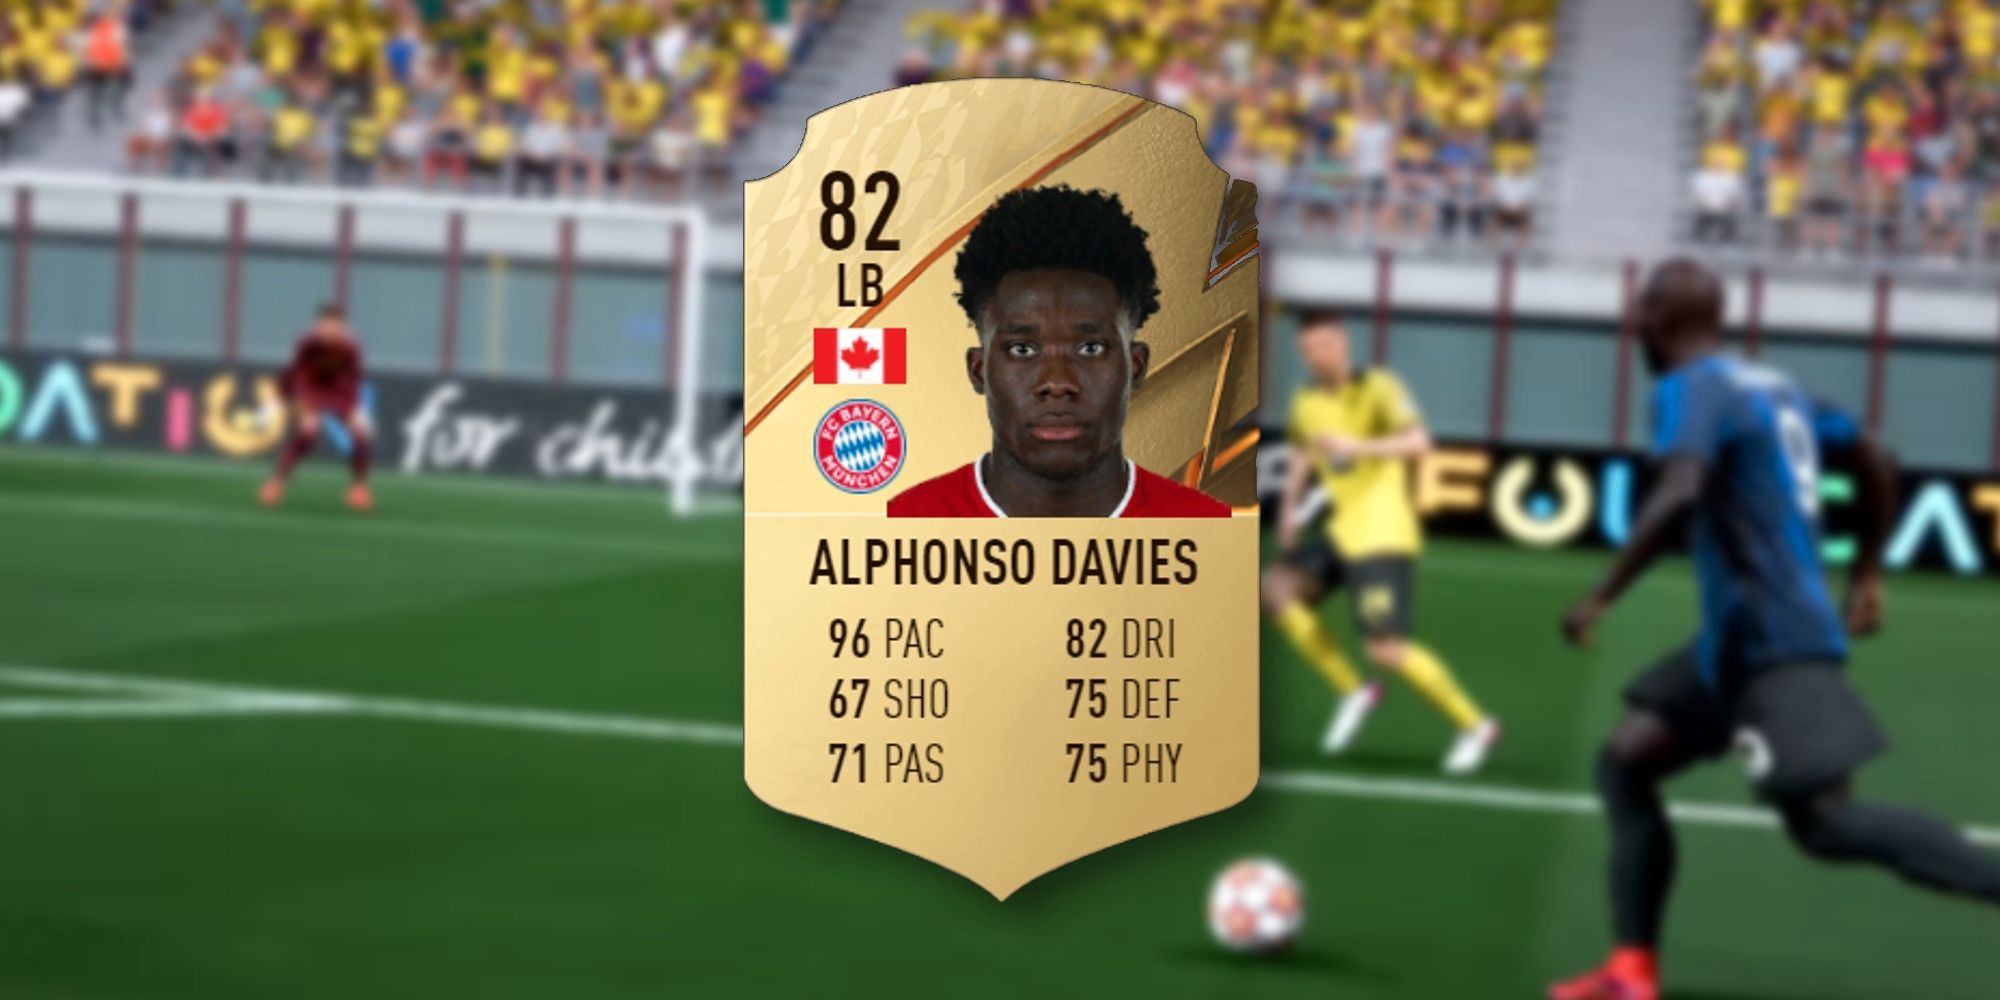 Alphonso Davies's rating in FIFA 22